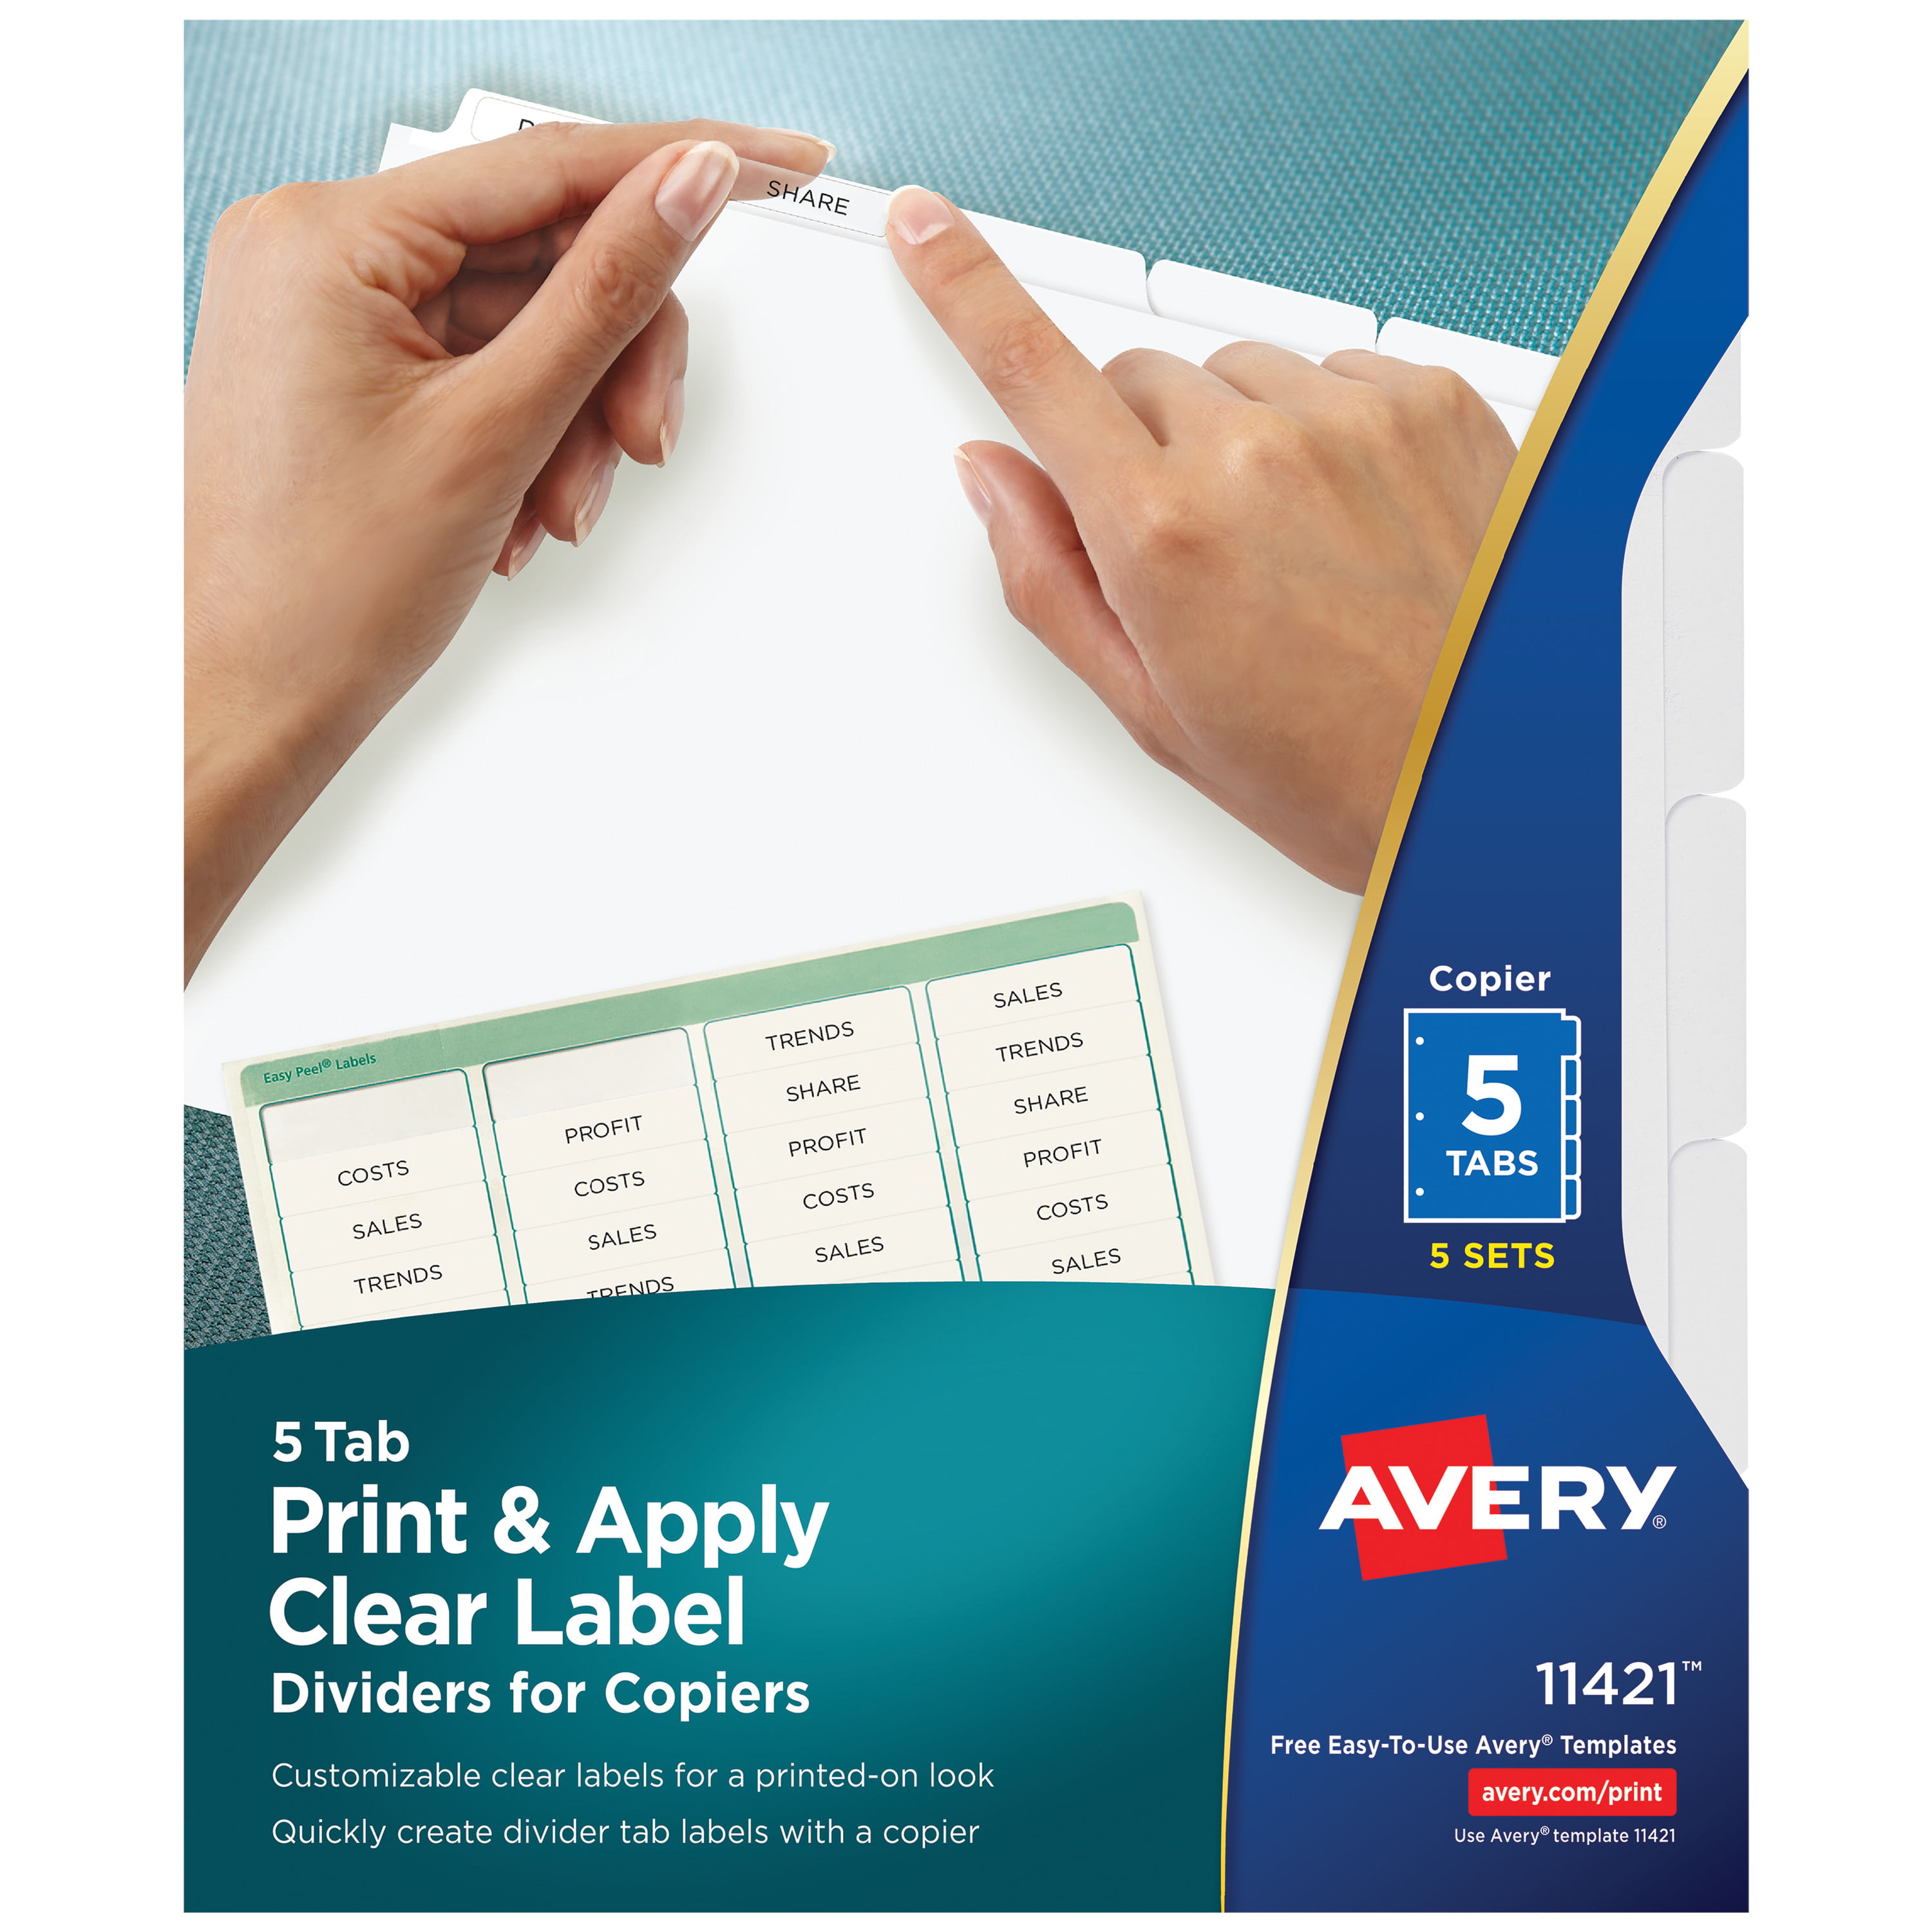 5-Tab Avery 11421 Print & Apply Clear Label Dividers w/White Tabs 5 Sets Copiers Letter 